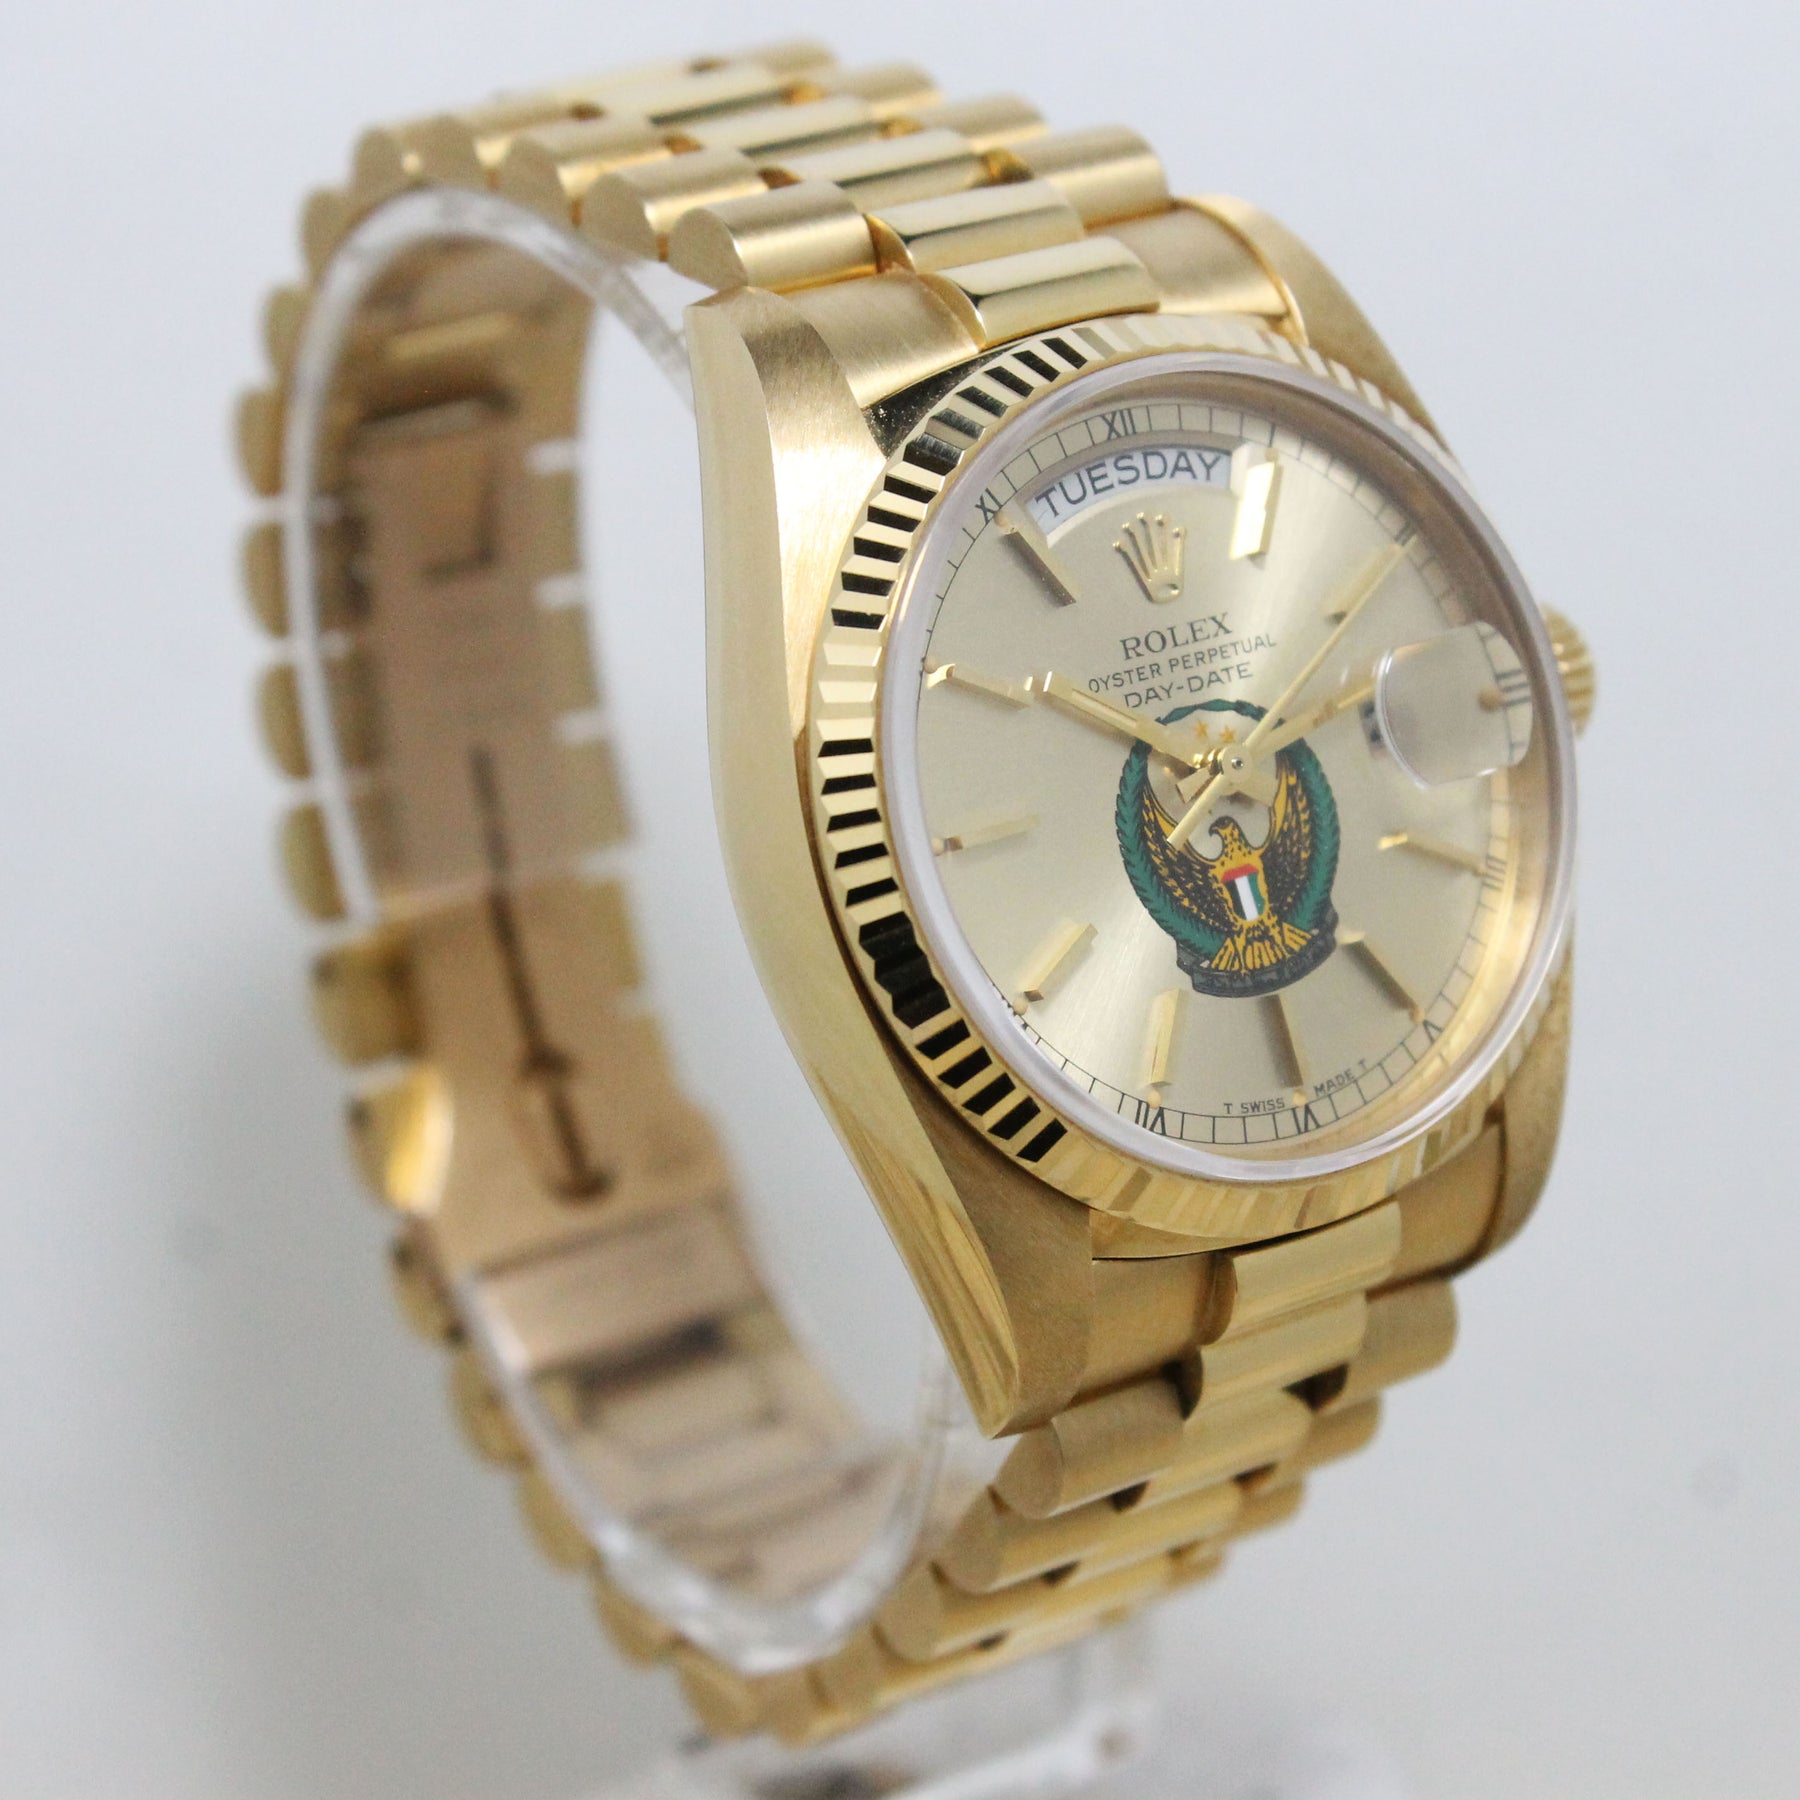 1984 Rolex Day Date UAE Armed Forces NOS Ref. 18038